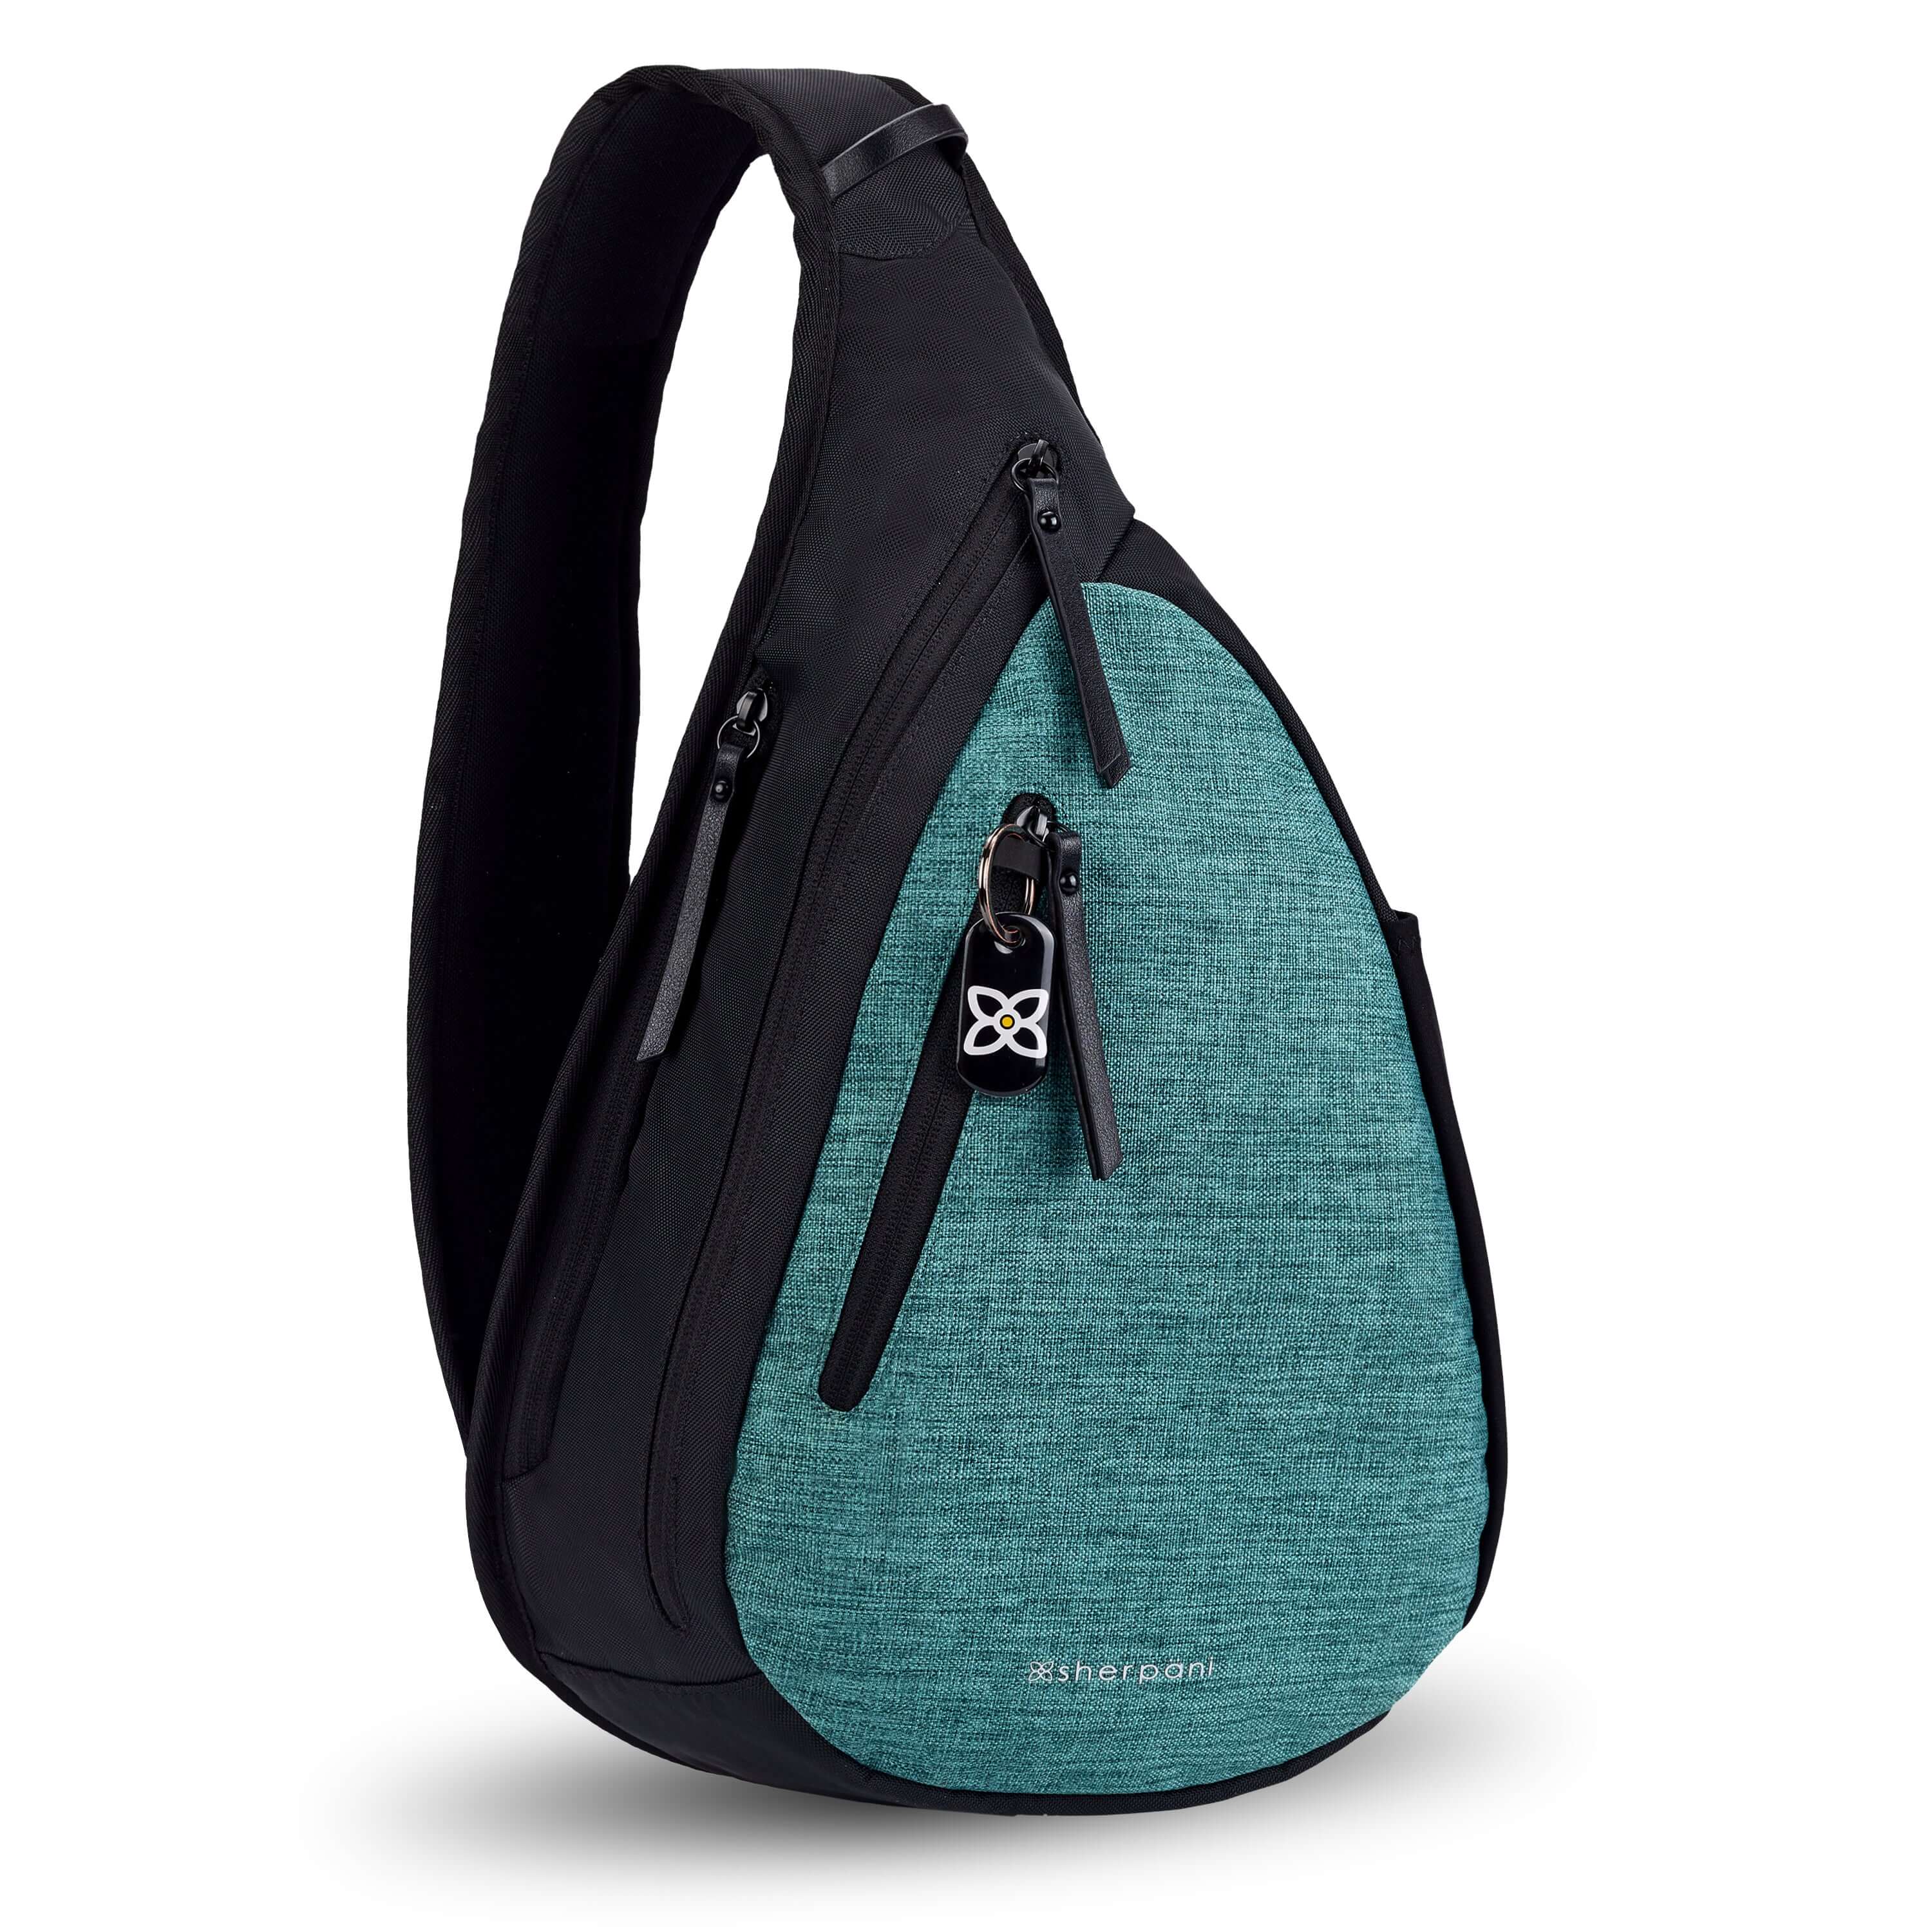 Angled front view of Sherpani's Anti-Theft bag, the Esprit AT in Teal, with vegan leather accents in black. There is a locking zipper compartment on the front, and two more zipper compartments on the side. An elastic water bottle holder sits on the other side of the bag.